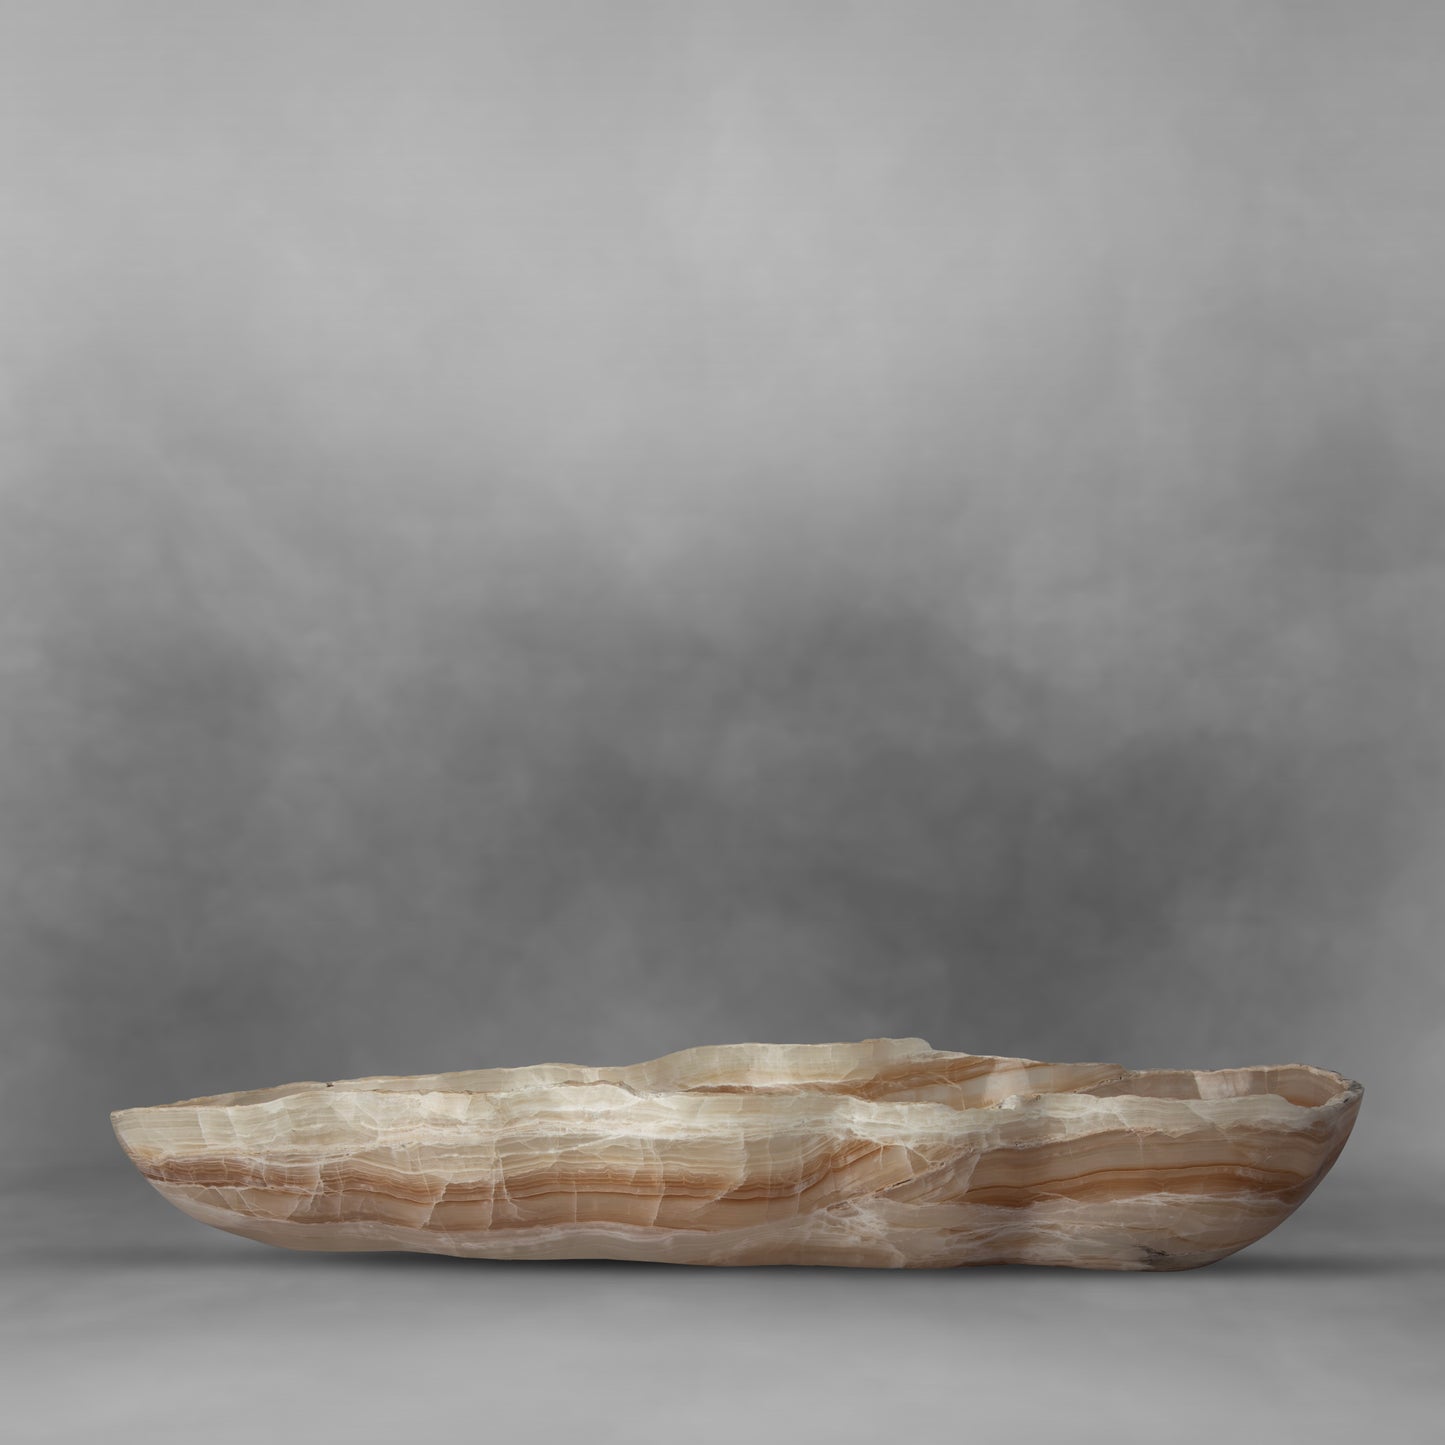 Delicate canoe, patterns in light brown with white, large onyx bowl